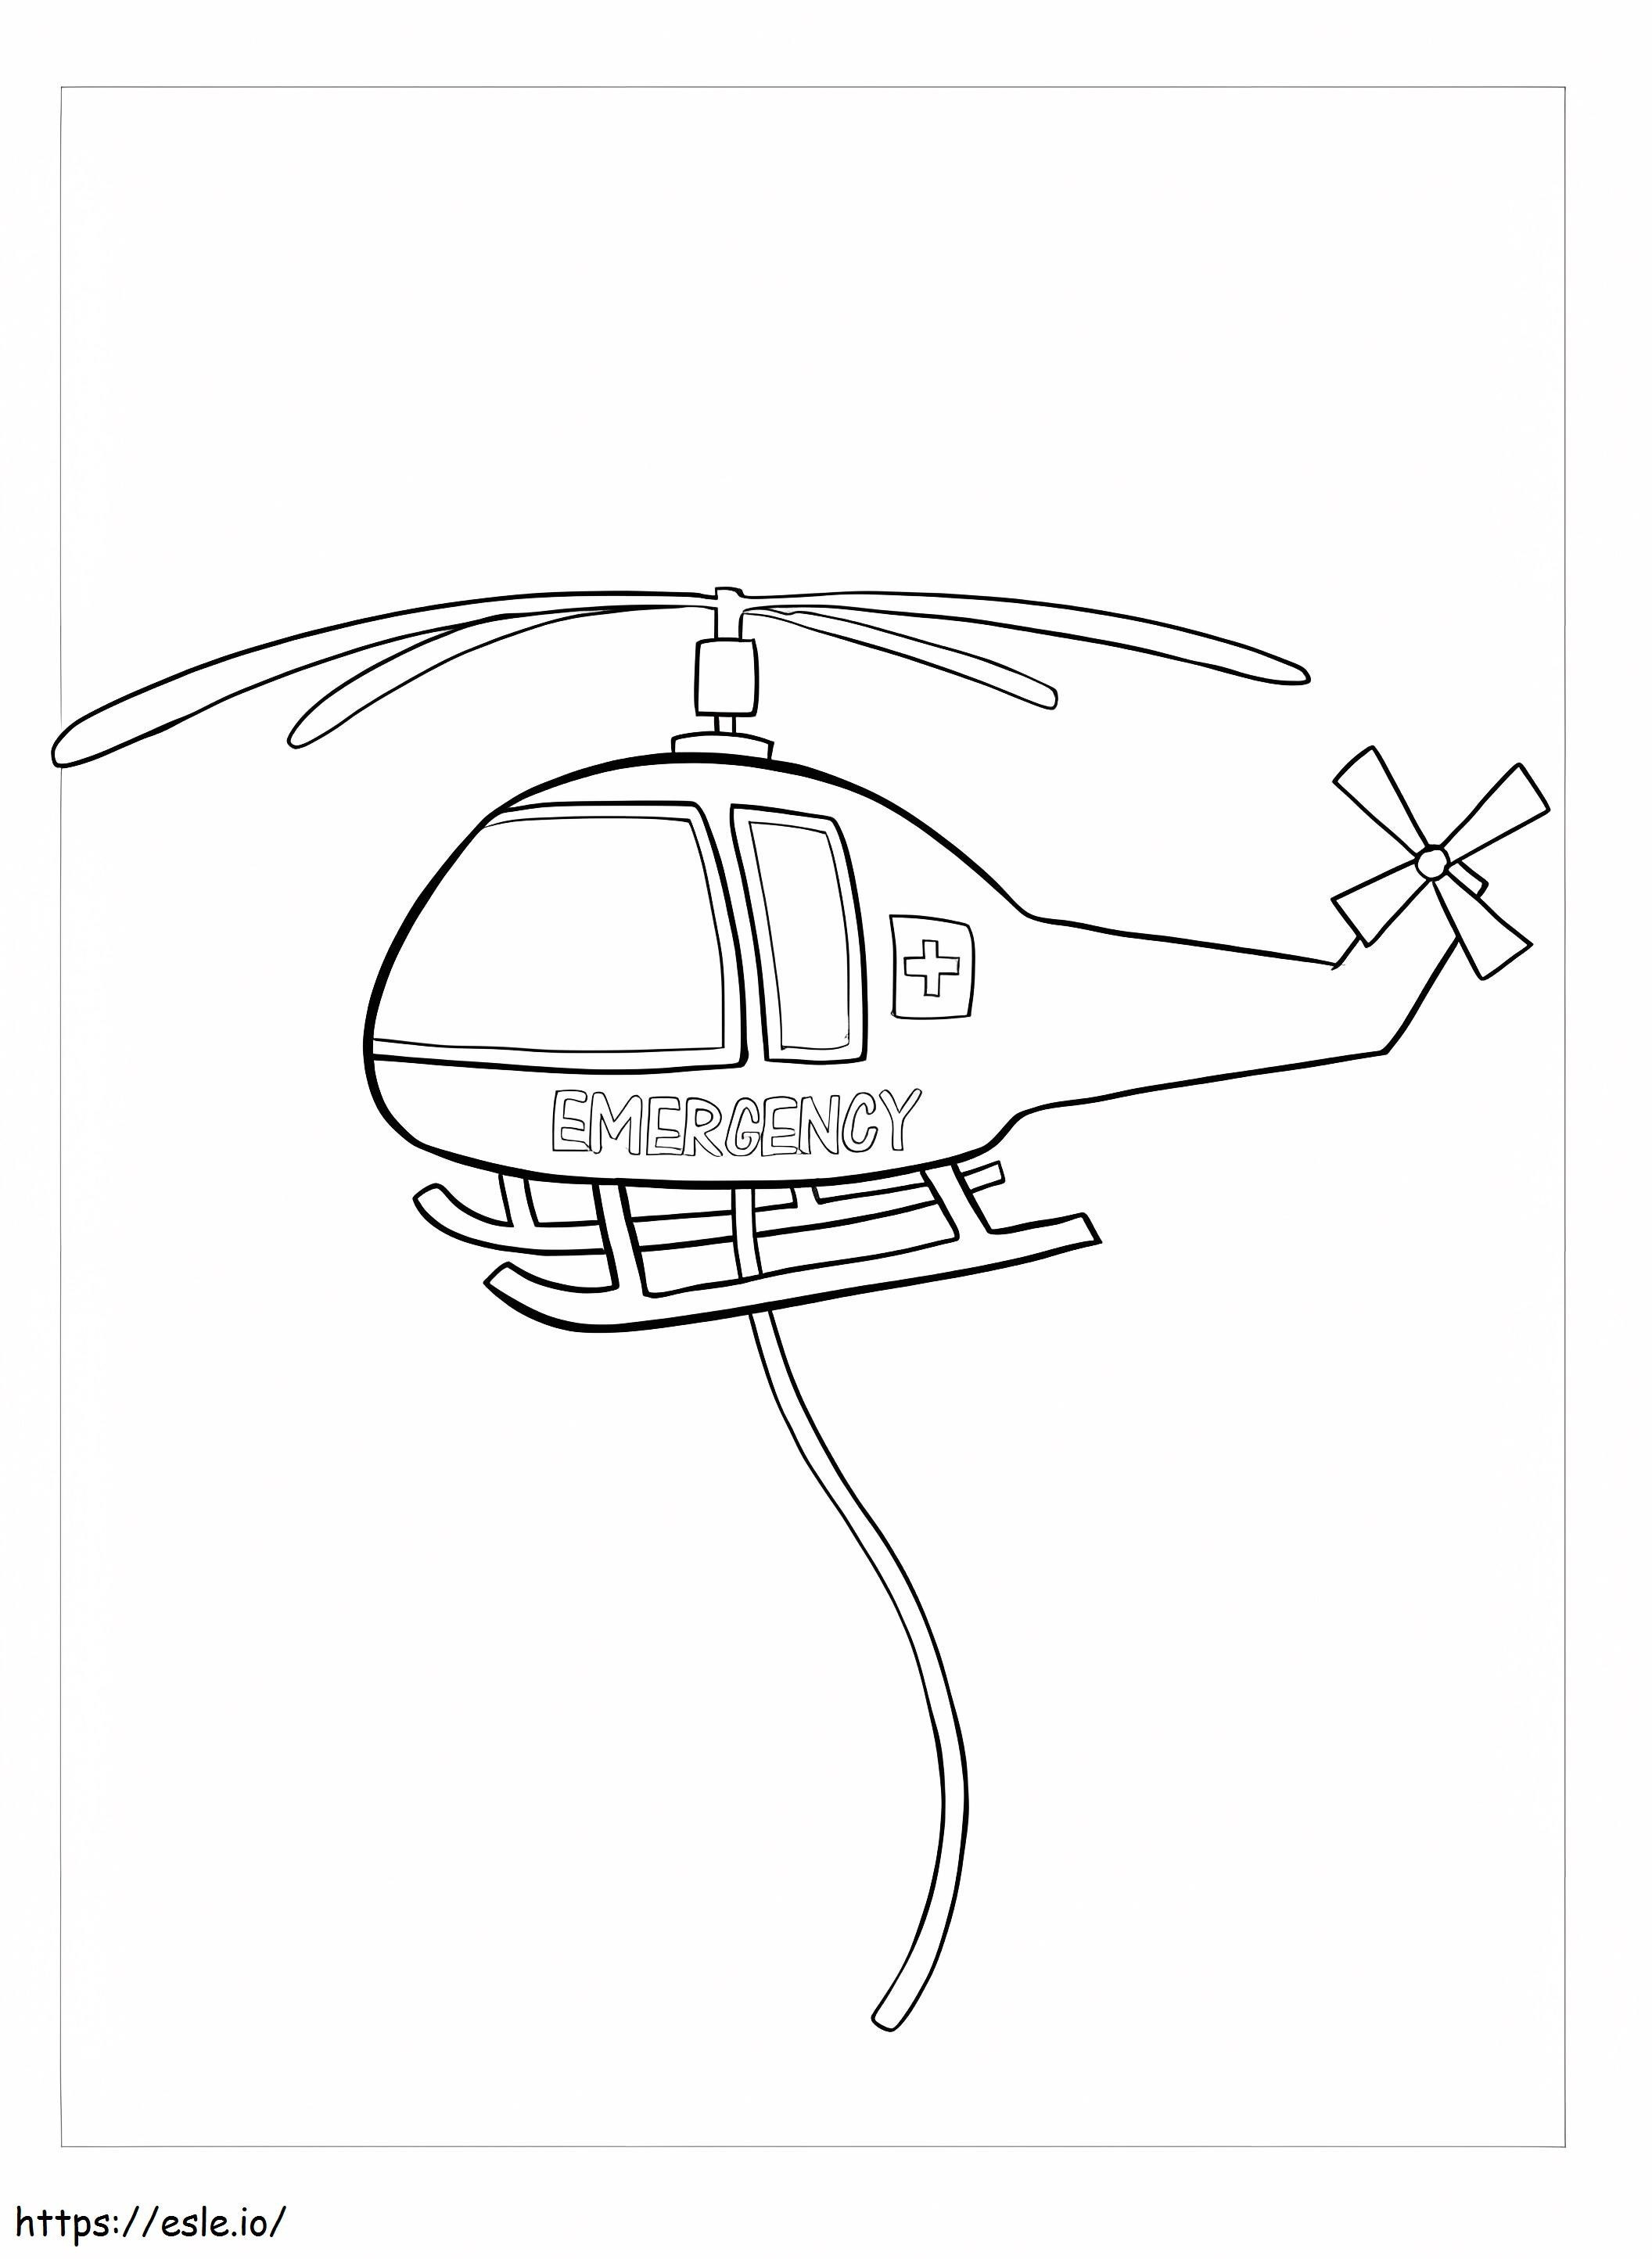 Rescue Helicopter coloring page